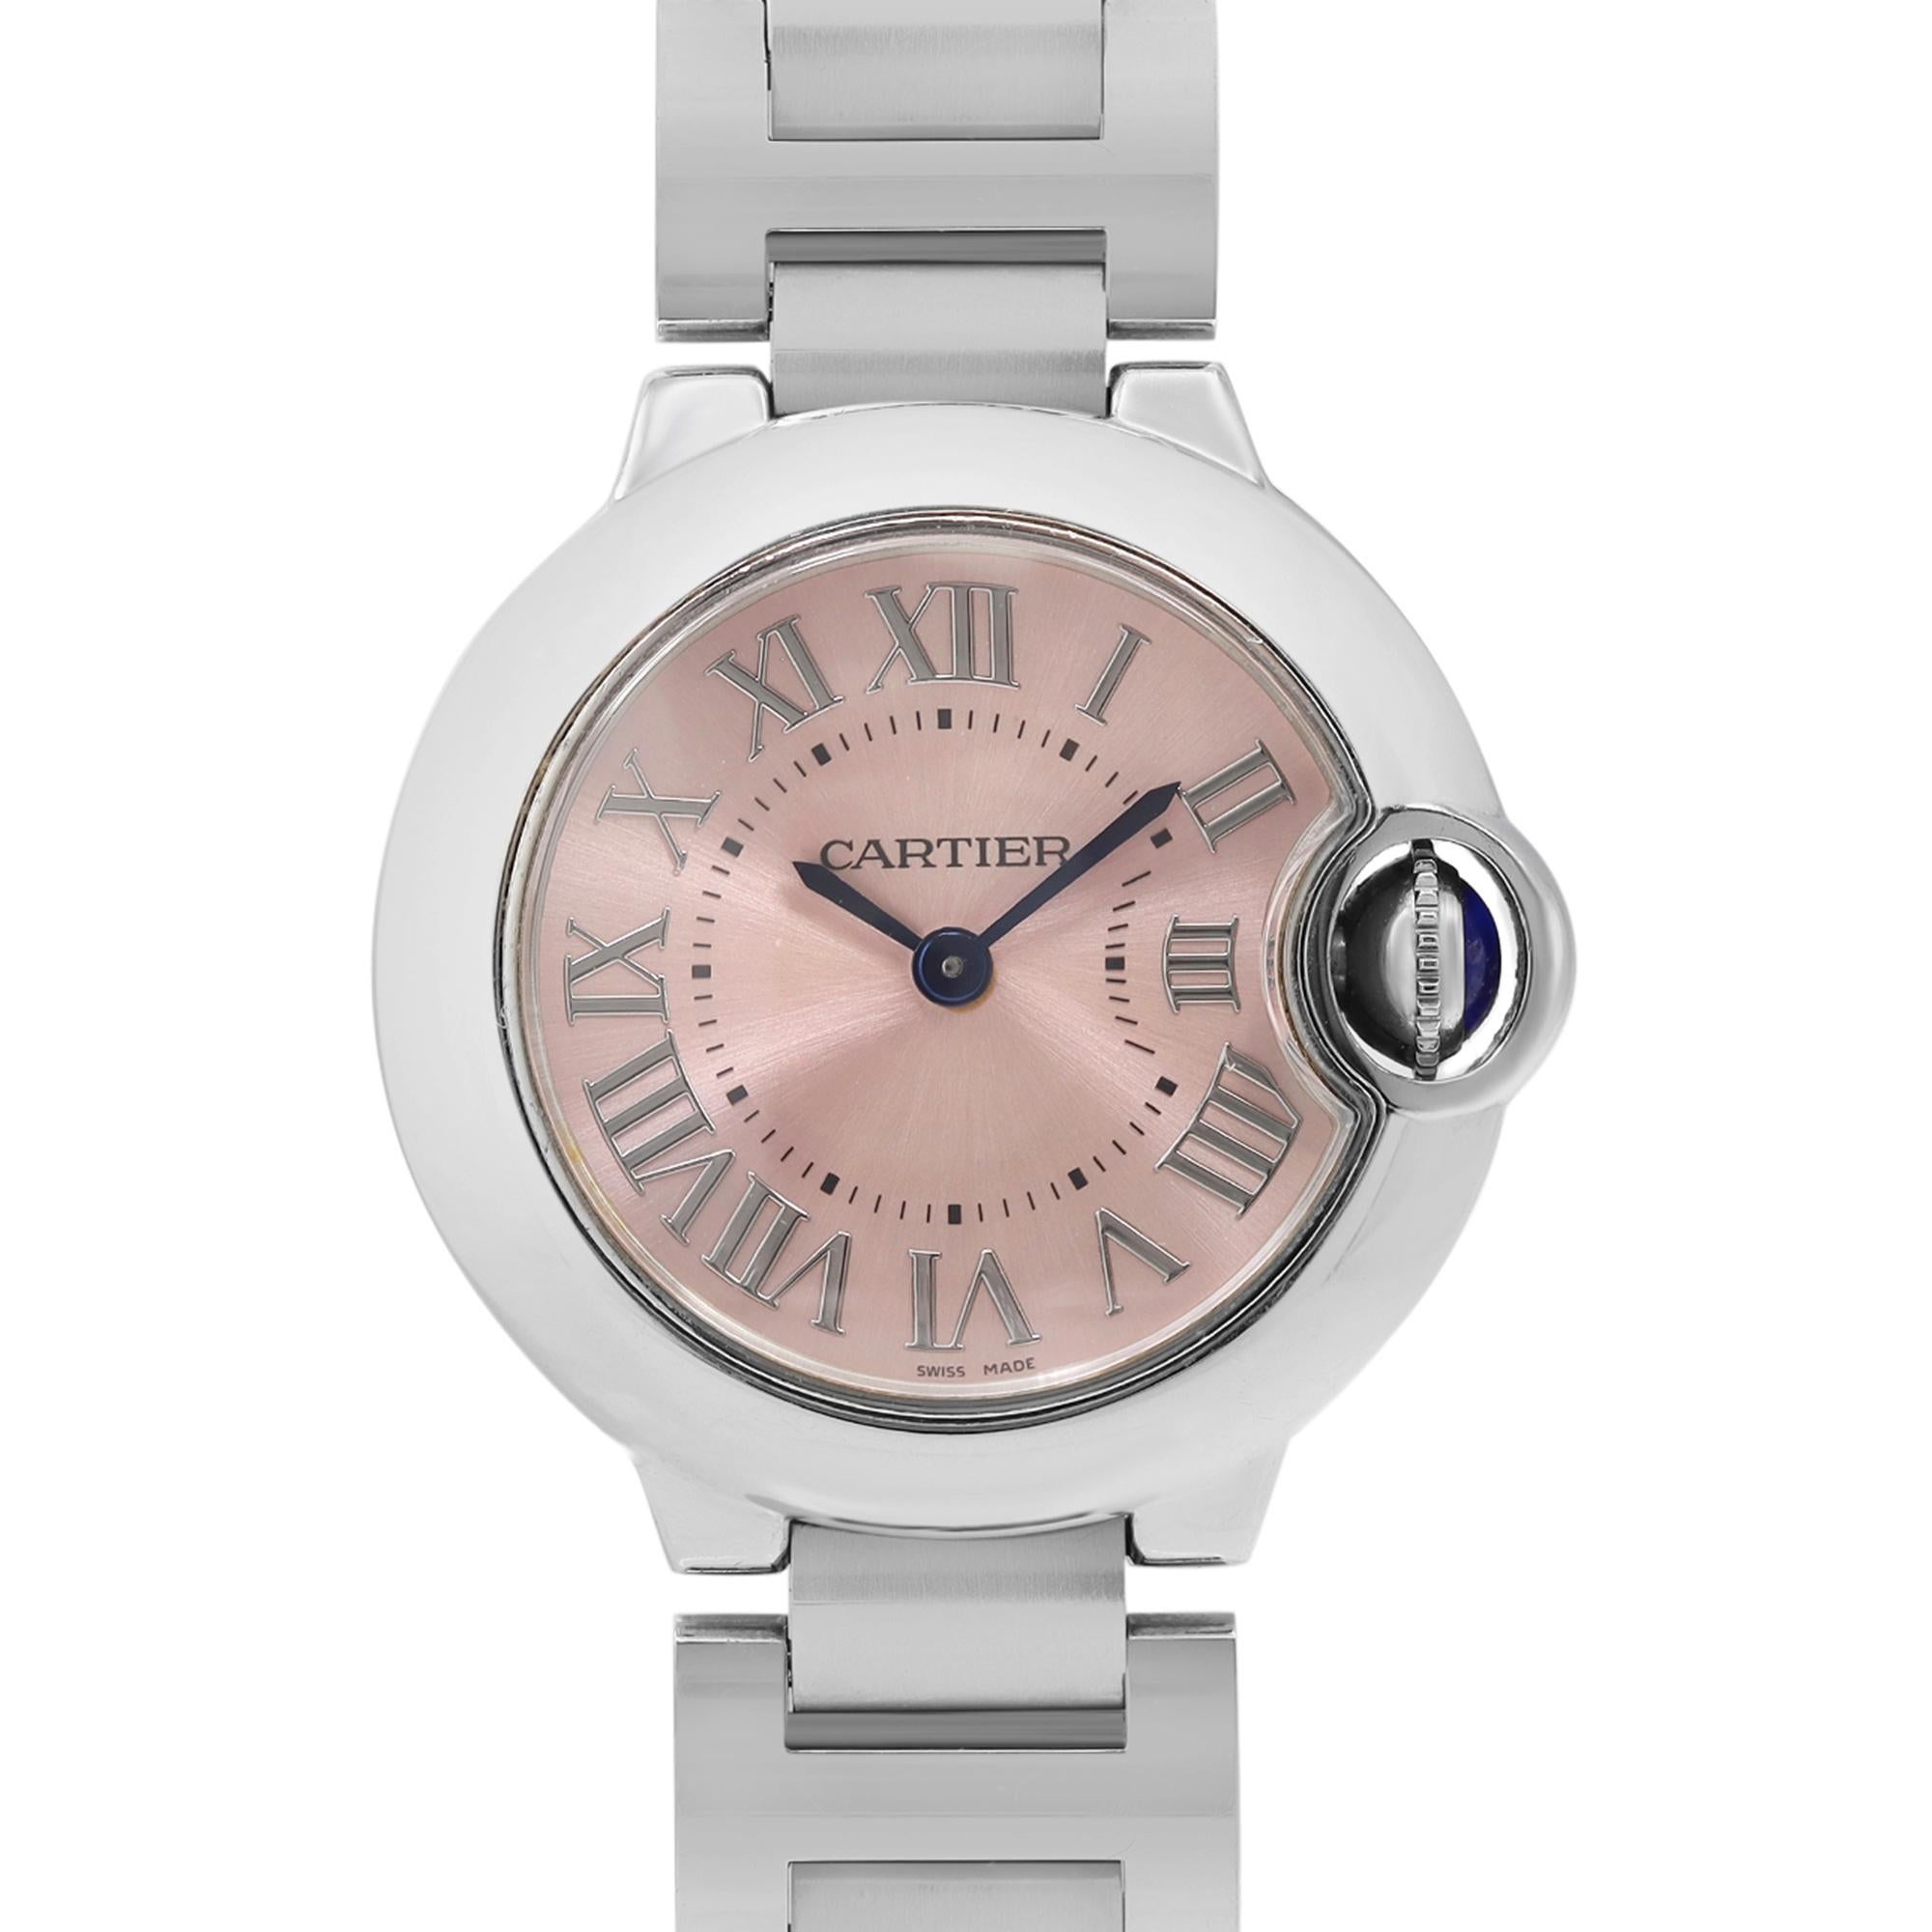 Pre-owned Cartier Ballon Bleu 28mm Stainless Steel Pink Roman Dial Ladies Quartz Watch W6920038. This Beautiful Timepiece is powered by a Quartz (Battery Operated) Movement and Features: A Polished Stainless Steel Case and Bracelet with a Hidden